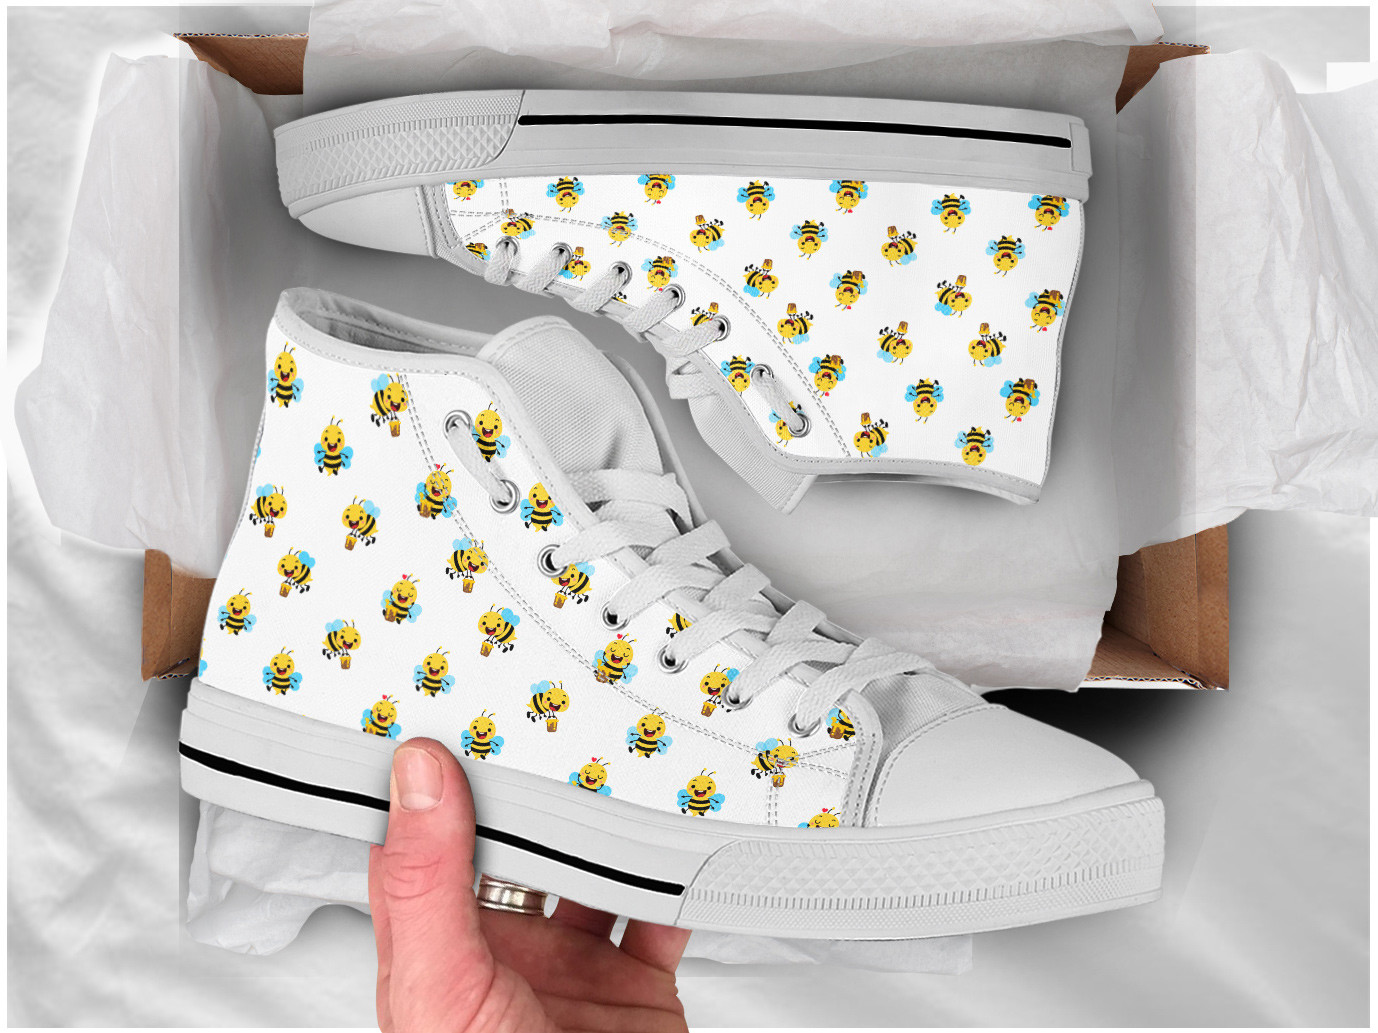 Honey Bee Shoes | Custom High Top Sneakers For Kids & Adults